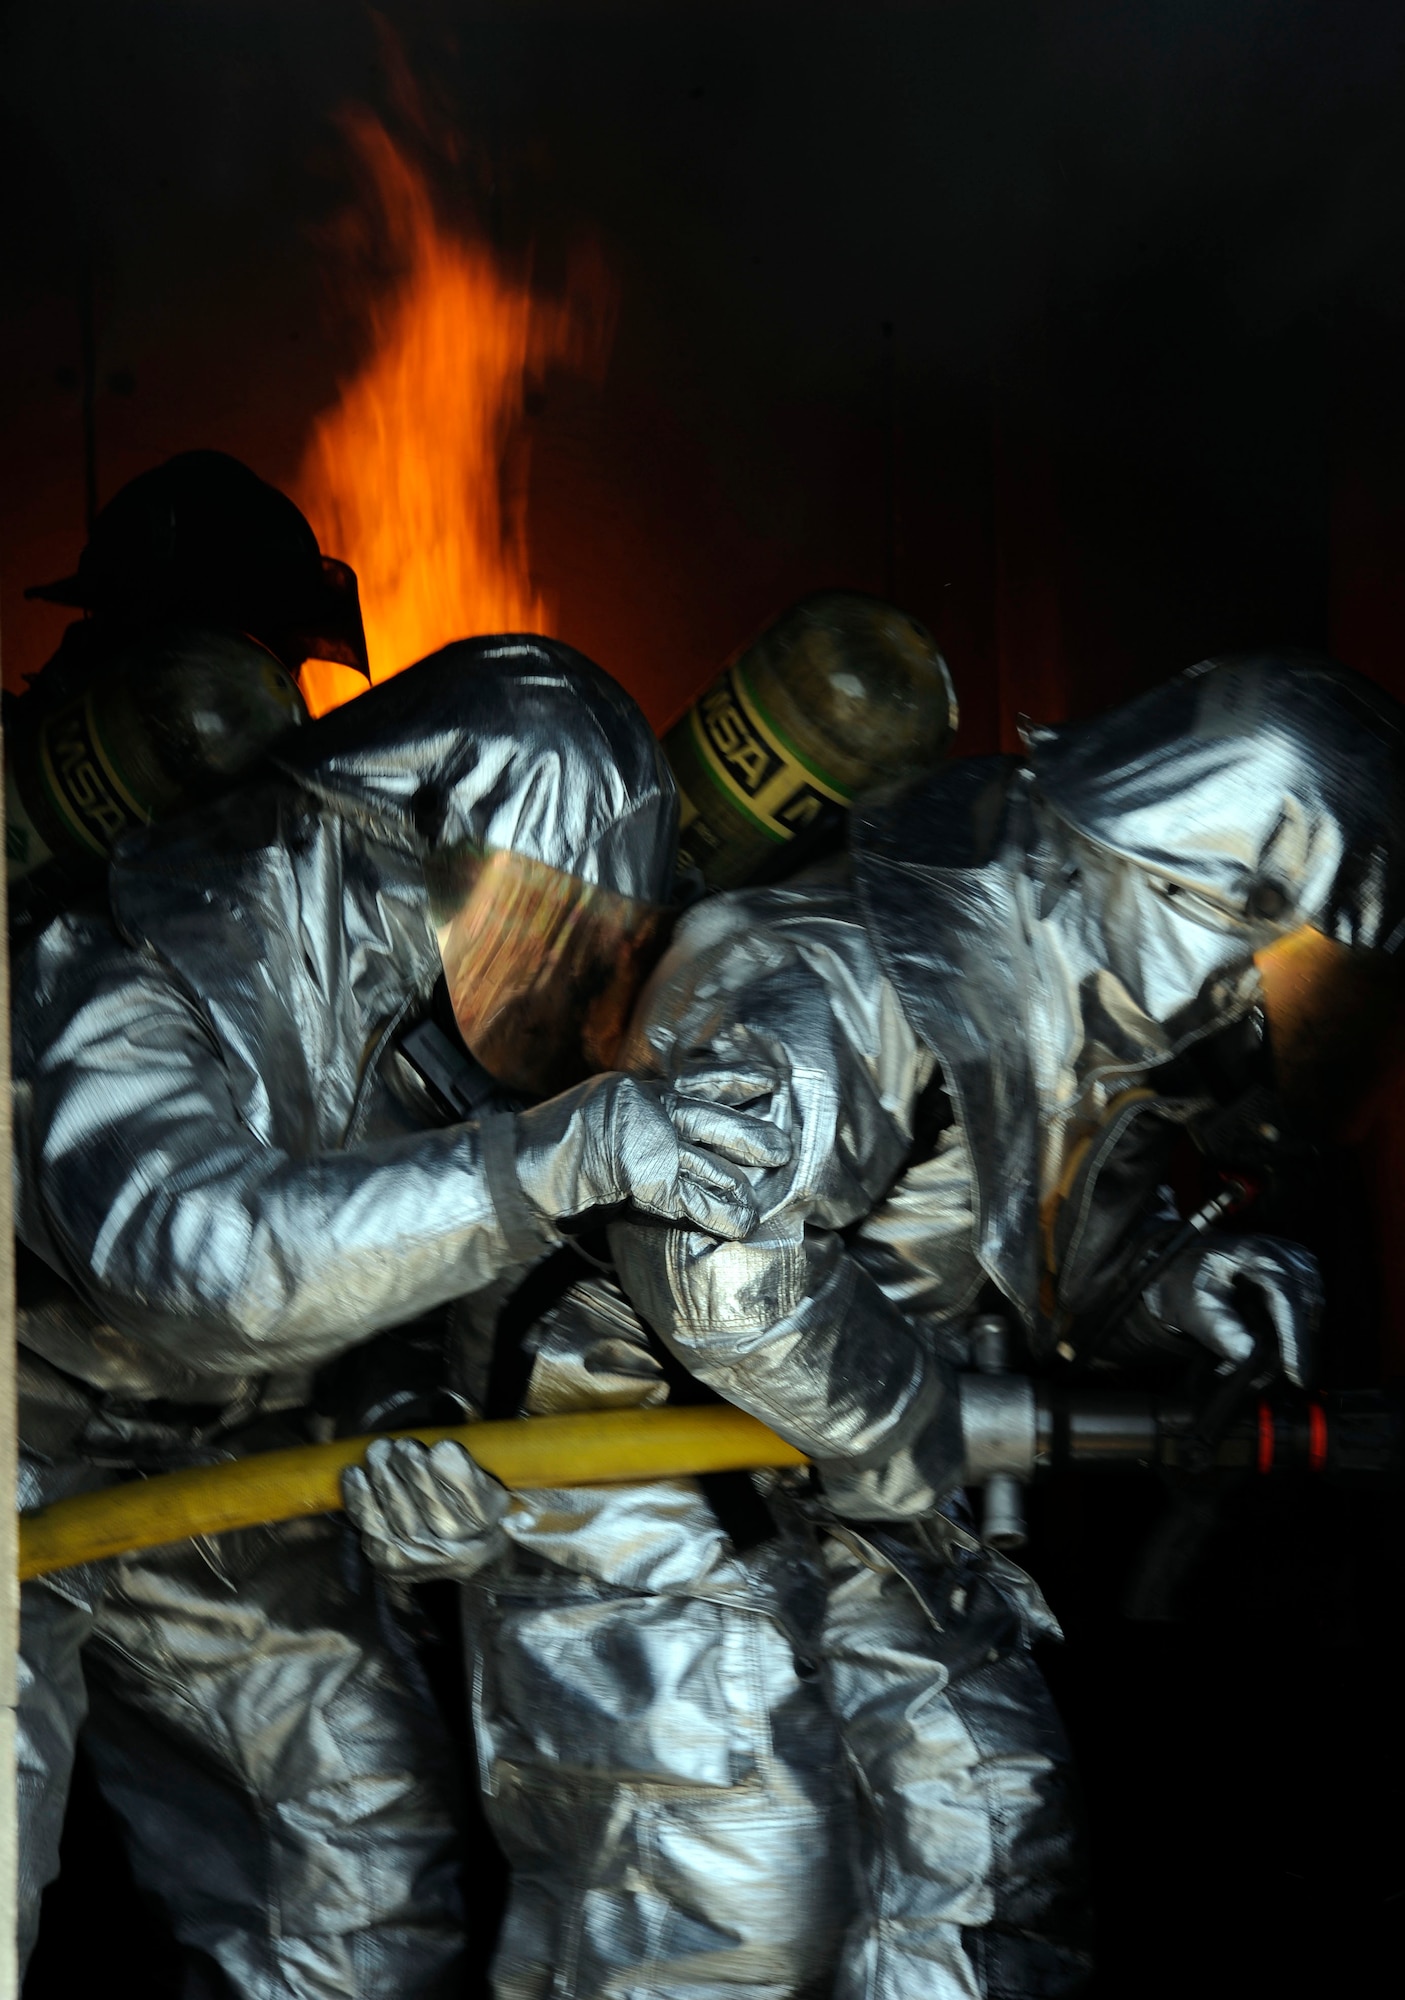 Members of the Iraqi air force and Iraqi civil defense clear out a room during a live-burn exercise in Baghdad, Iraq April 13, 2009.  The 26 students are learning how to become fire fighters in the Basic Fire Course held at the Joint Fire Academy. The students have to be able to take what they learn in the classroom and perform it in real life scenarios.  Some of the tasks the students have to endure are live-fire training on cars, interior buildings and interior live fires.  (U.S. Air Force photo by Senior Airman Jacqueline Romero)